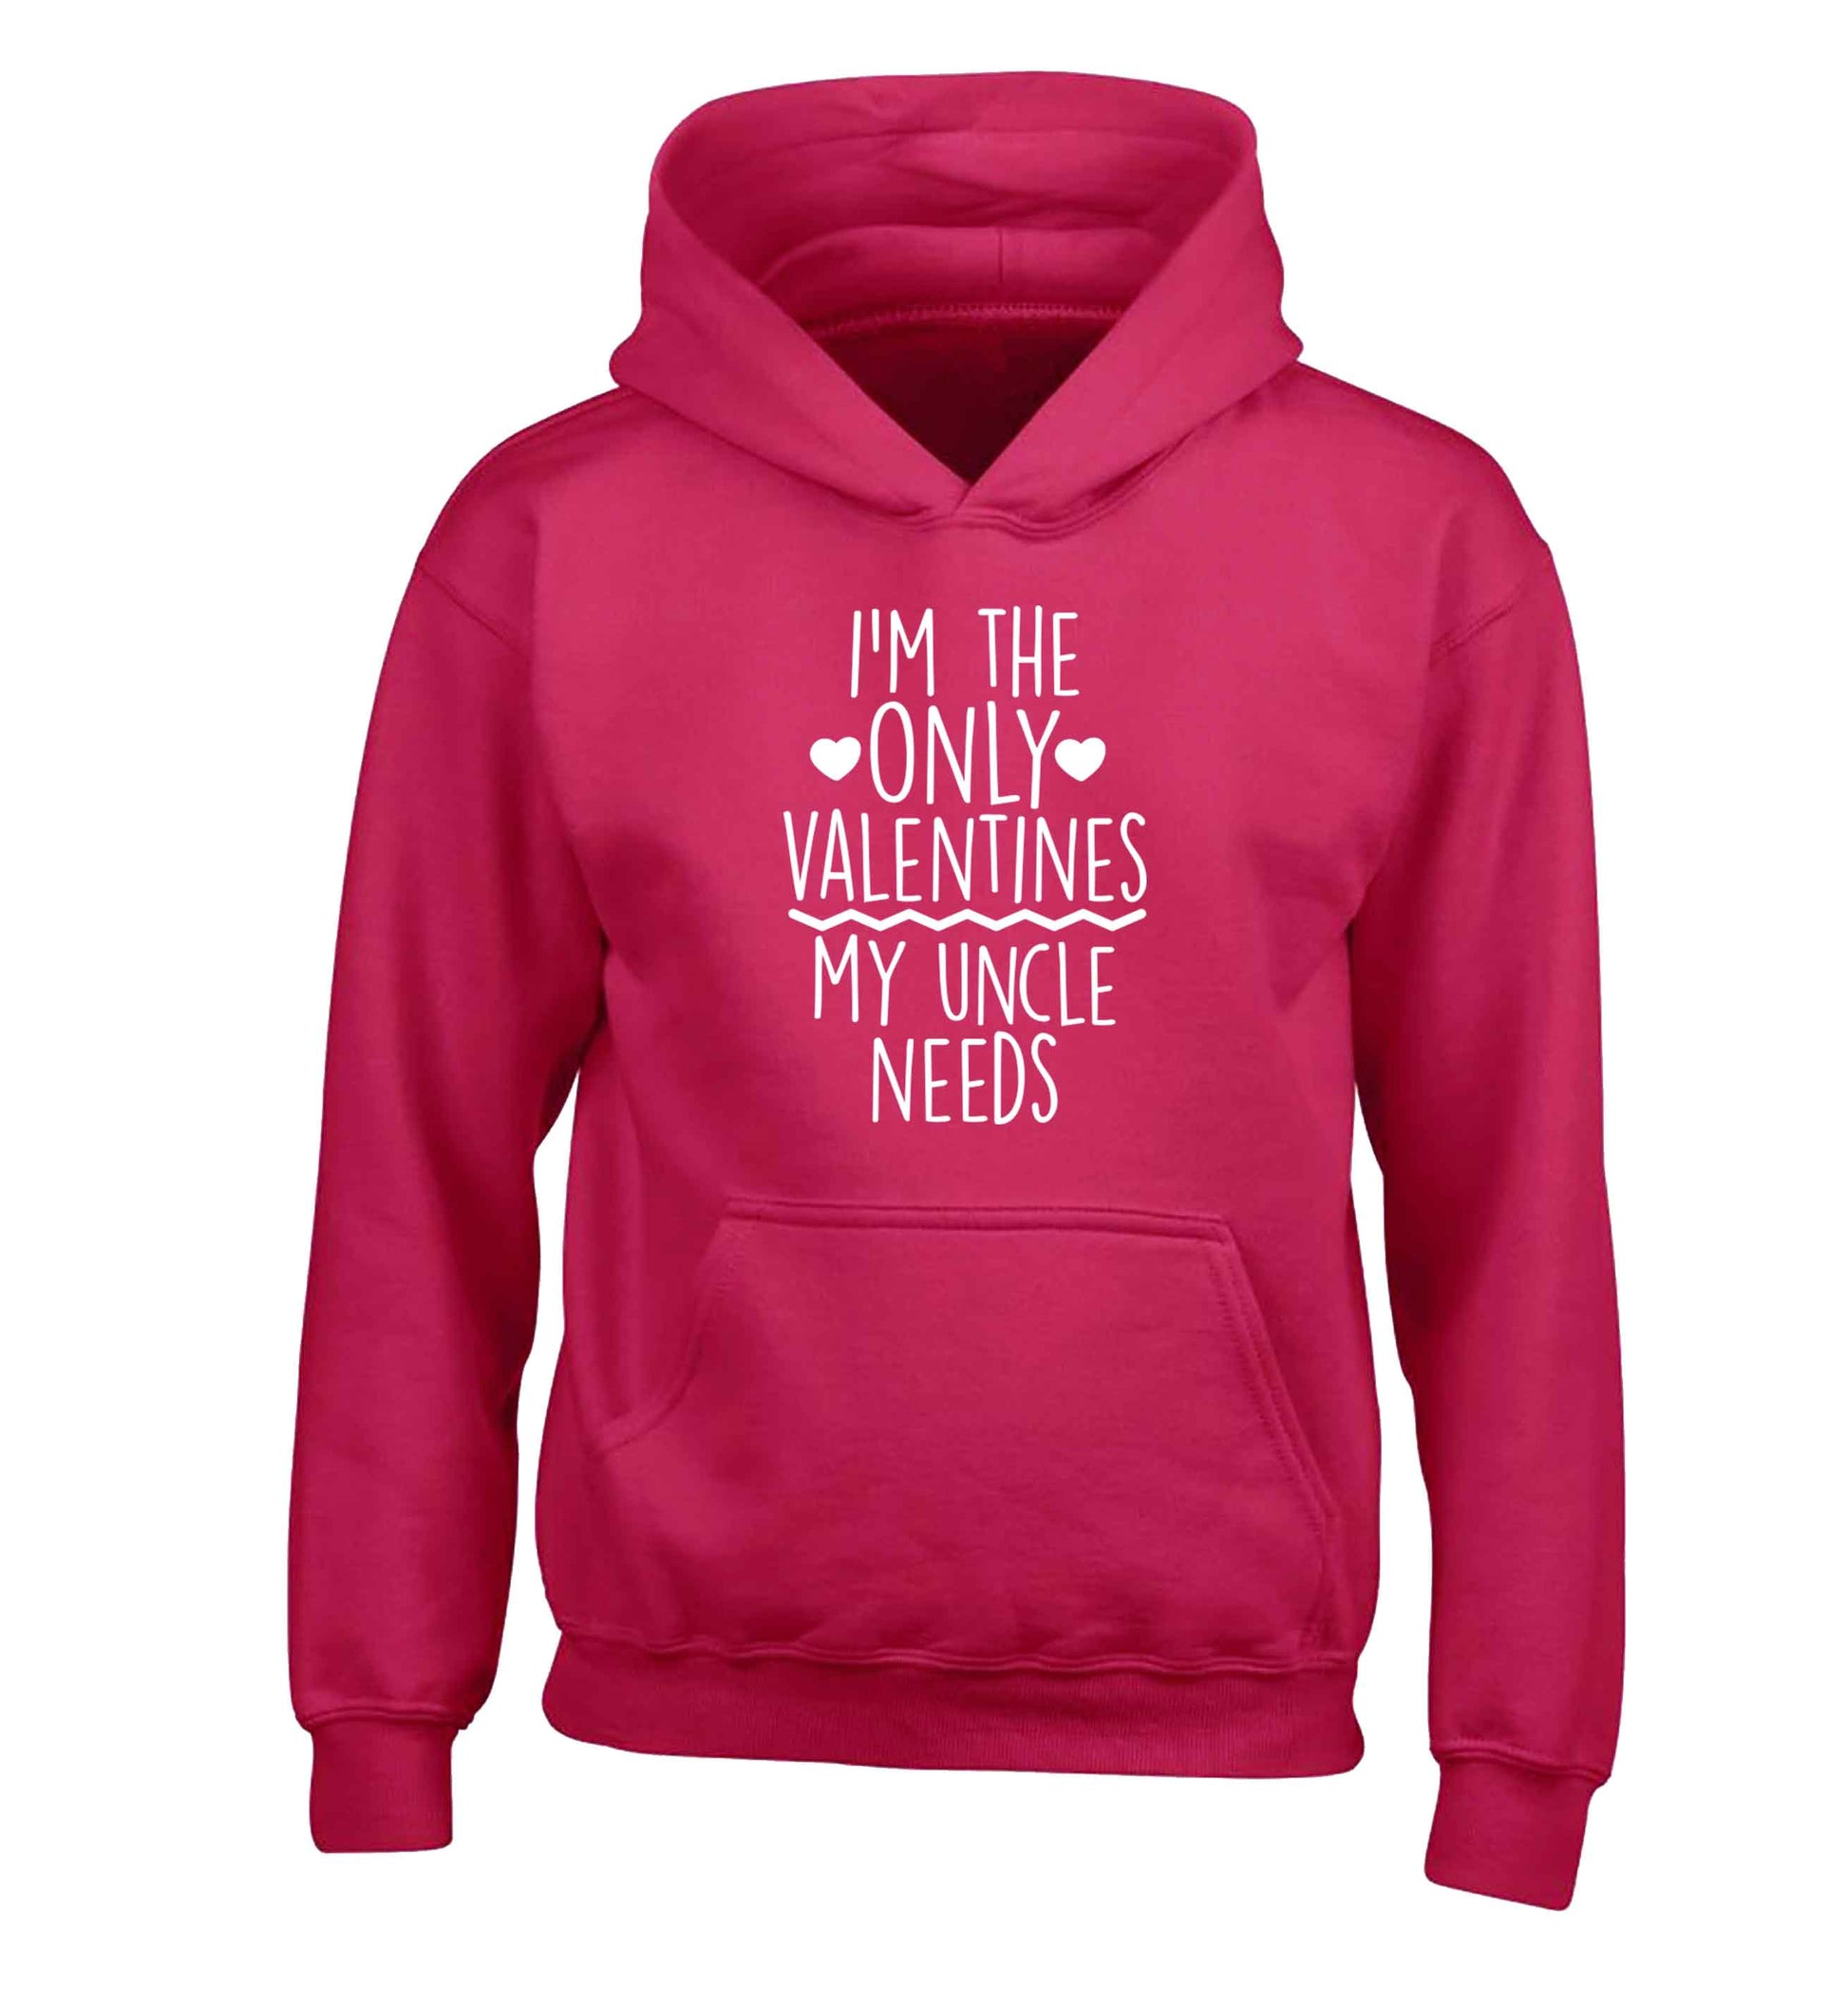 I'm the only valentines my uncle needs children's pink hoodie 12-13 Years